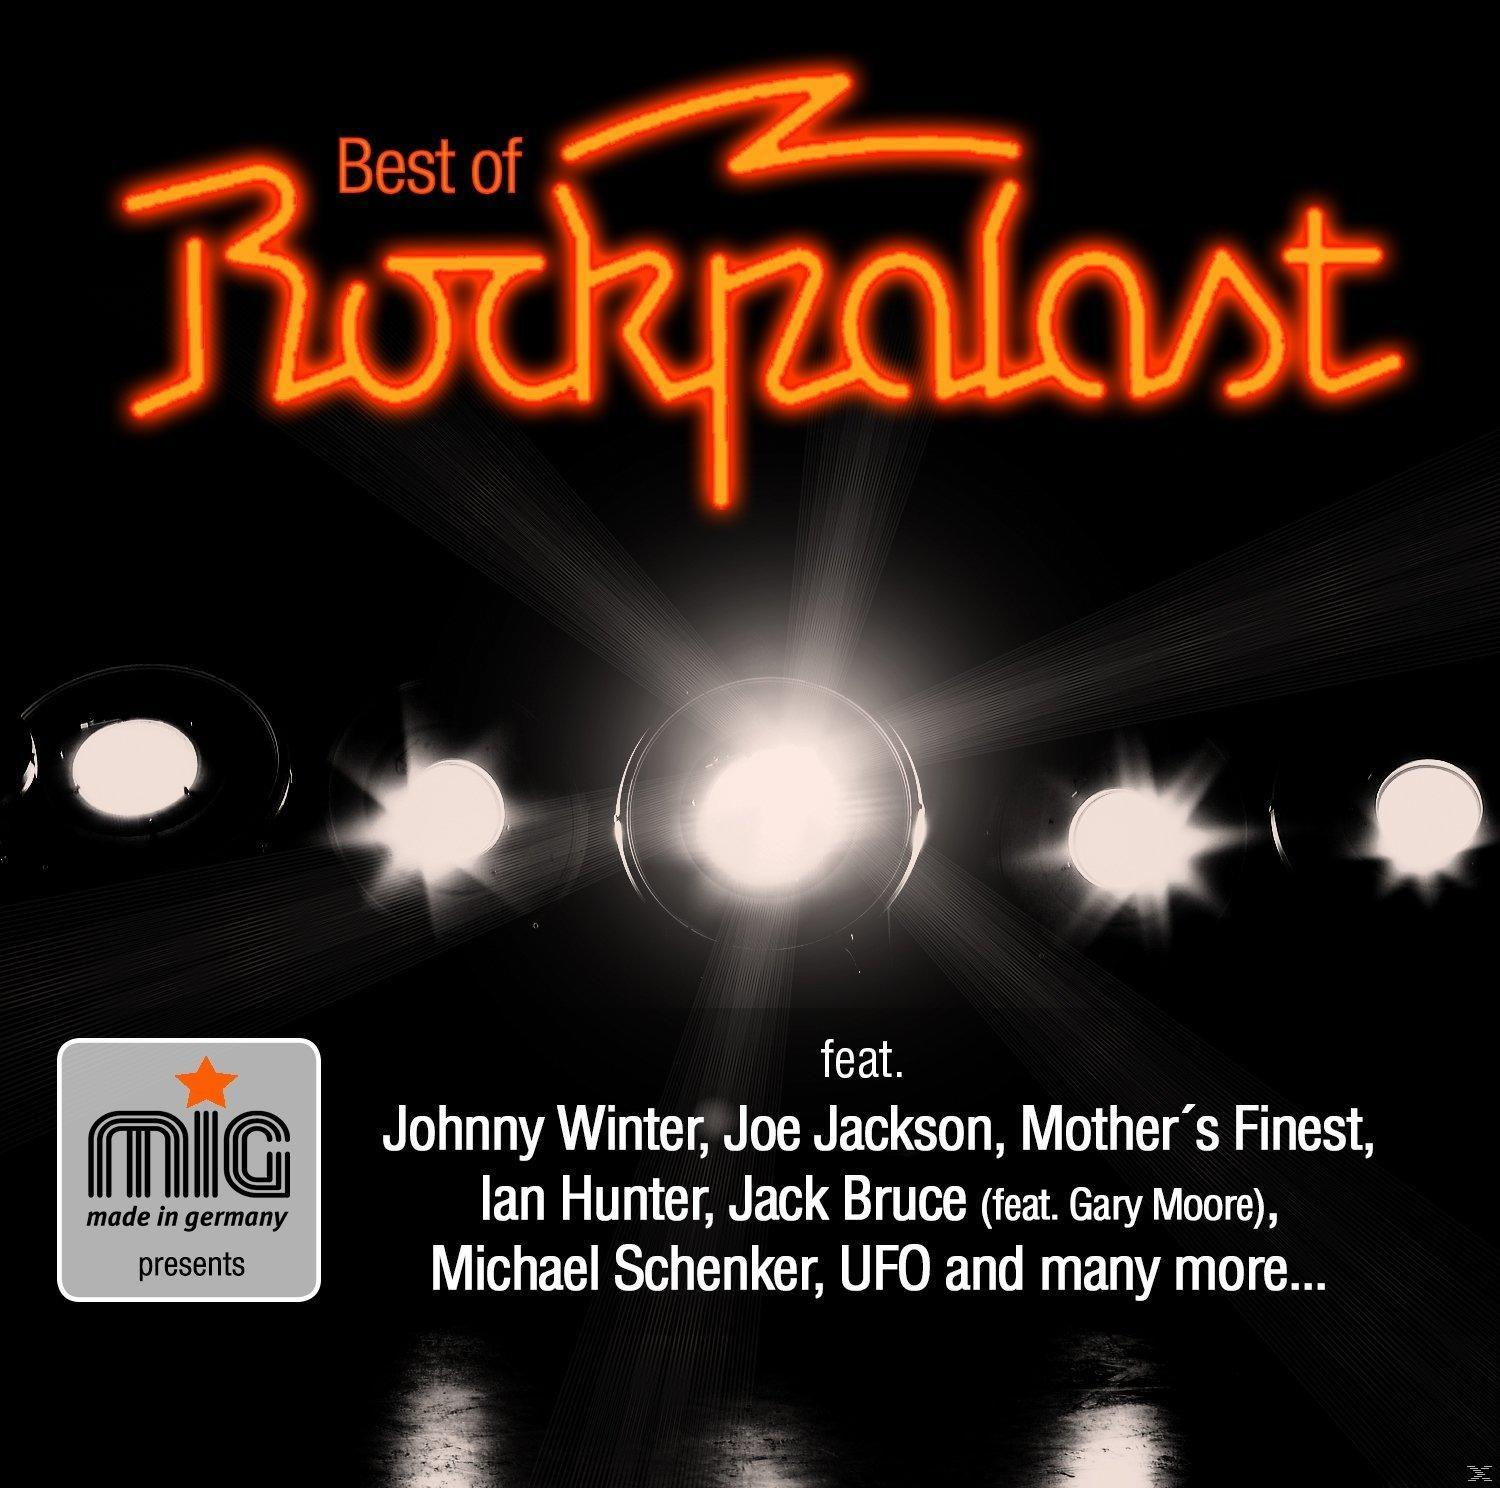 (CD) - Of VARIOUS Best Rockpalast -